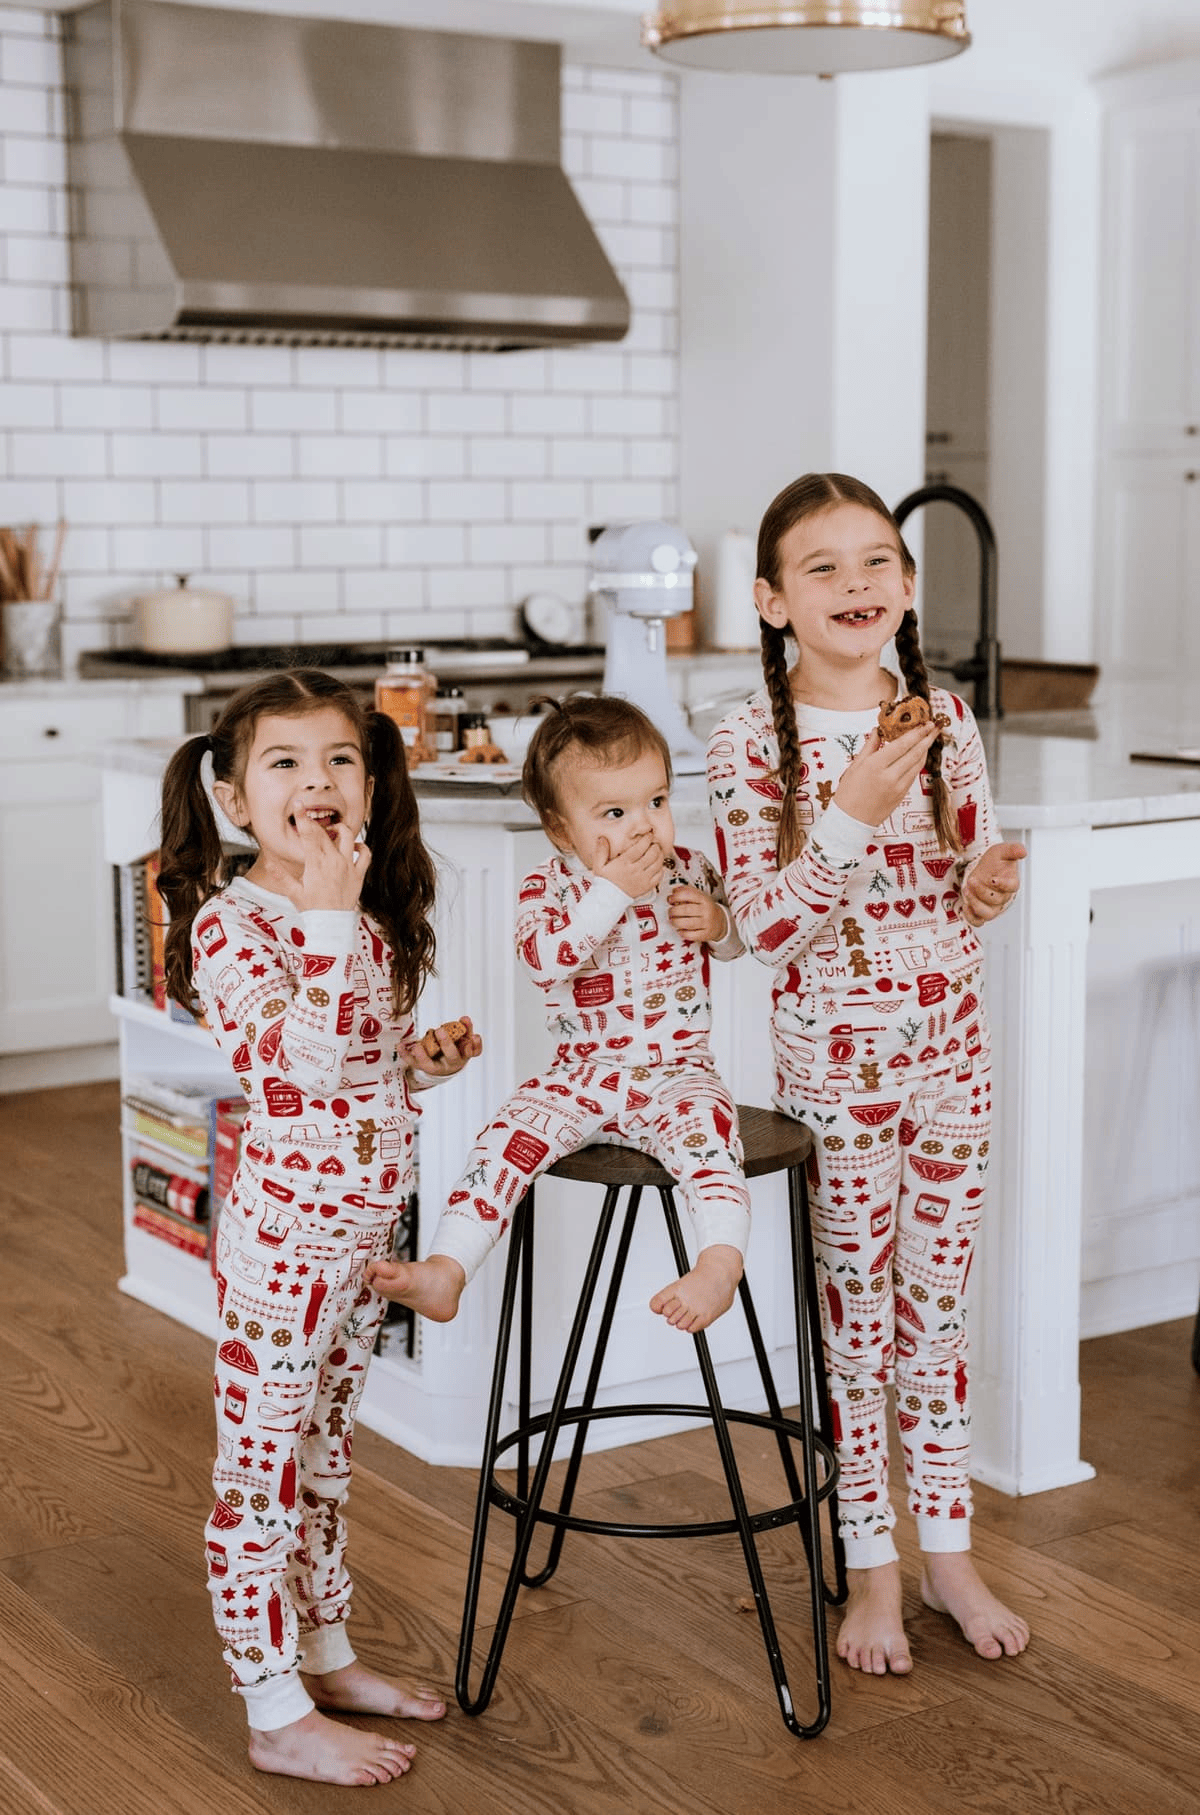 Hanna Andersson Christmas jammies 50% off for Black Friday